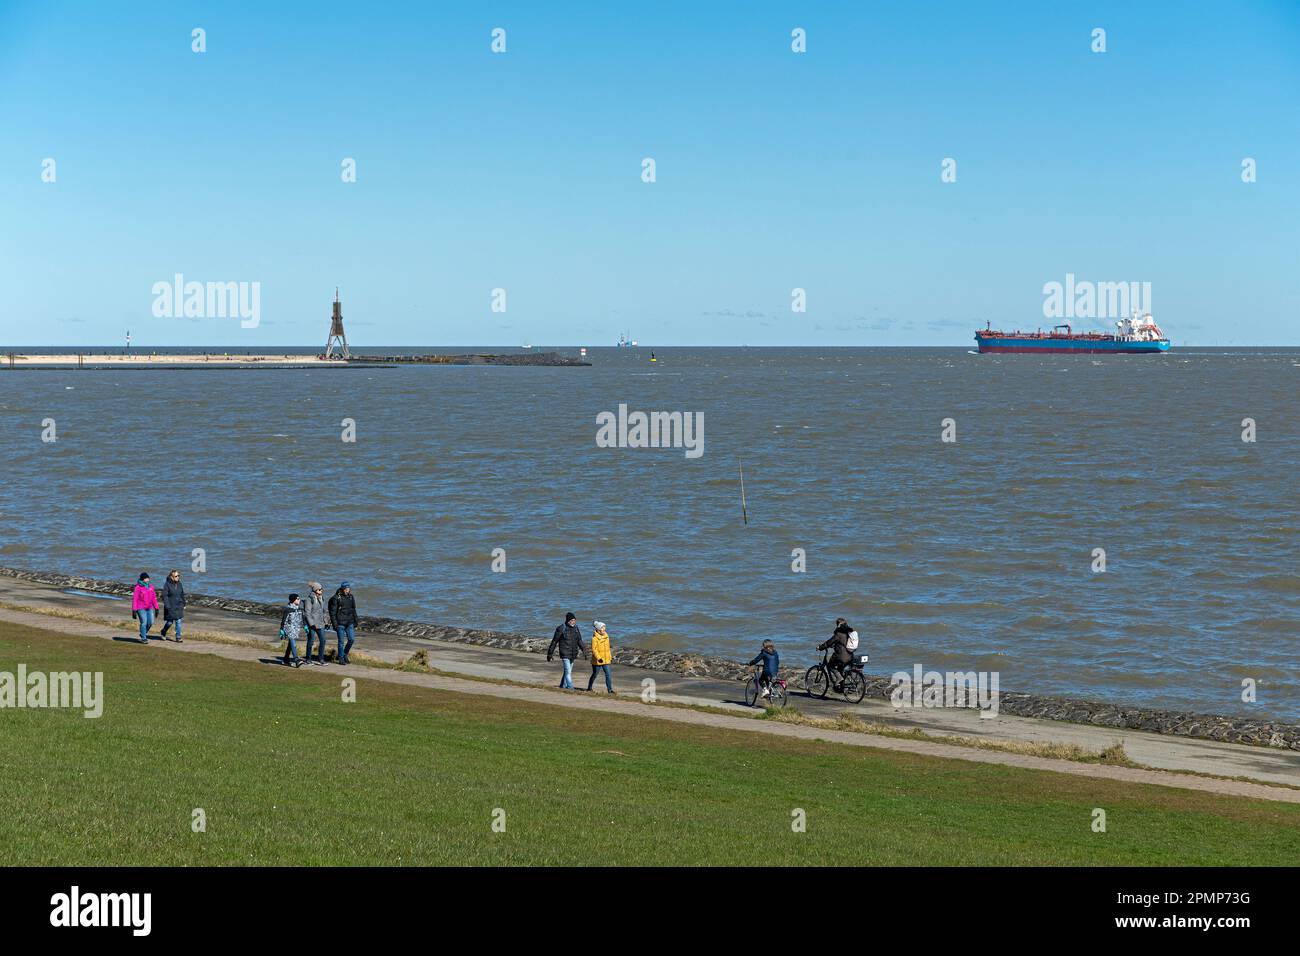 Sea marker Kugelbake, cyclists, hikers, container ship, Grimmershörn Bay, Cuxhaven, Lower-Saxony, Germany Stock Photo